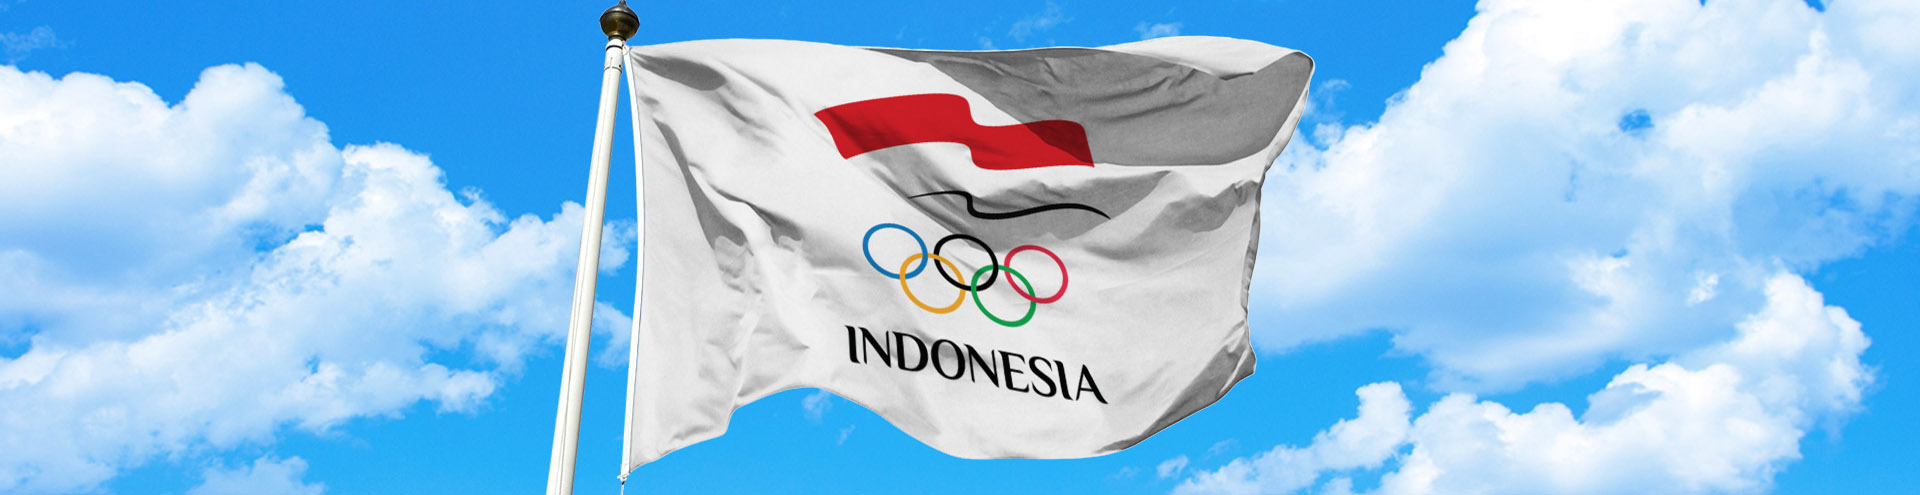 Indonesia Olympic Commitee - NOC's Autonomy Mandated by Olympic Charter